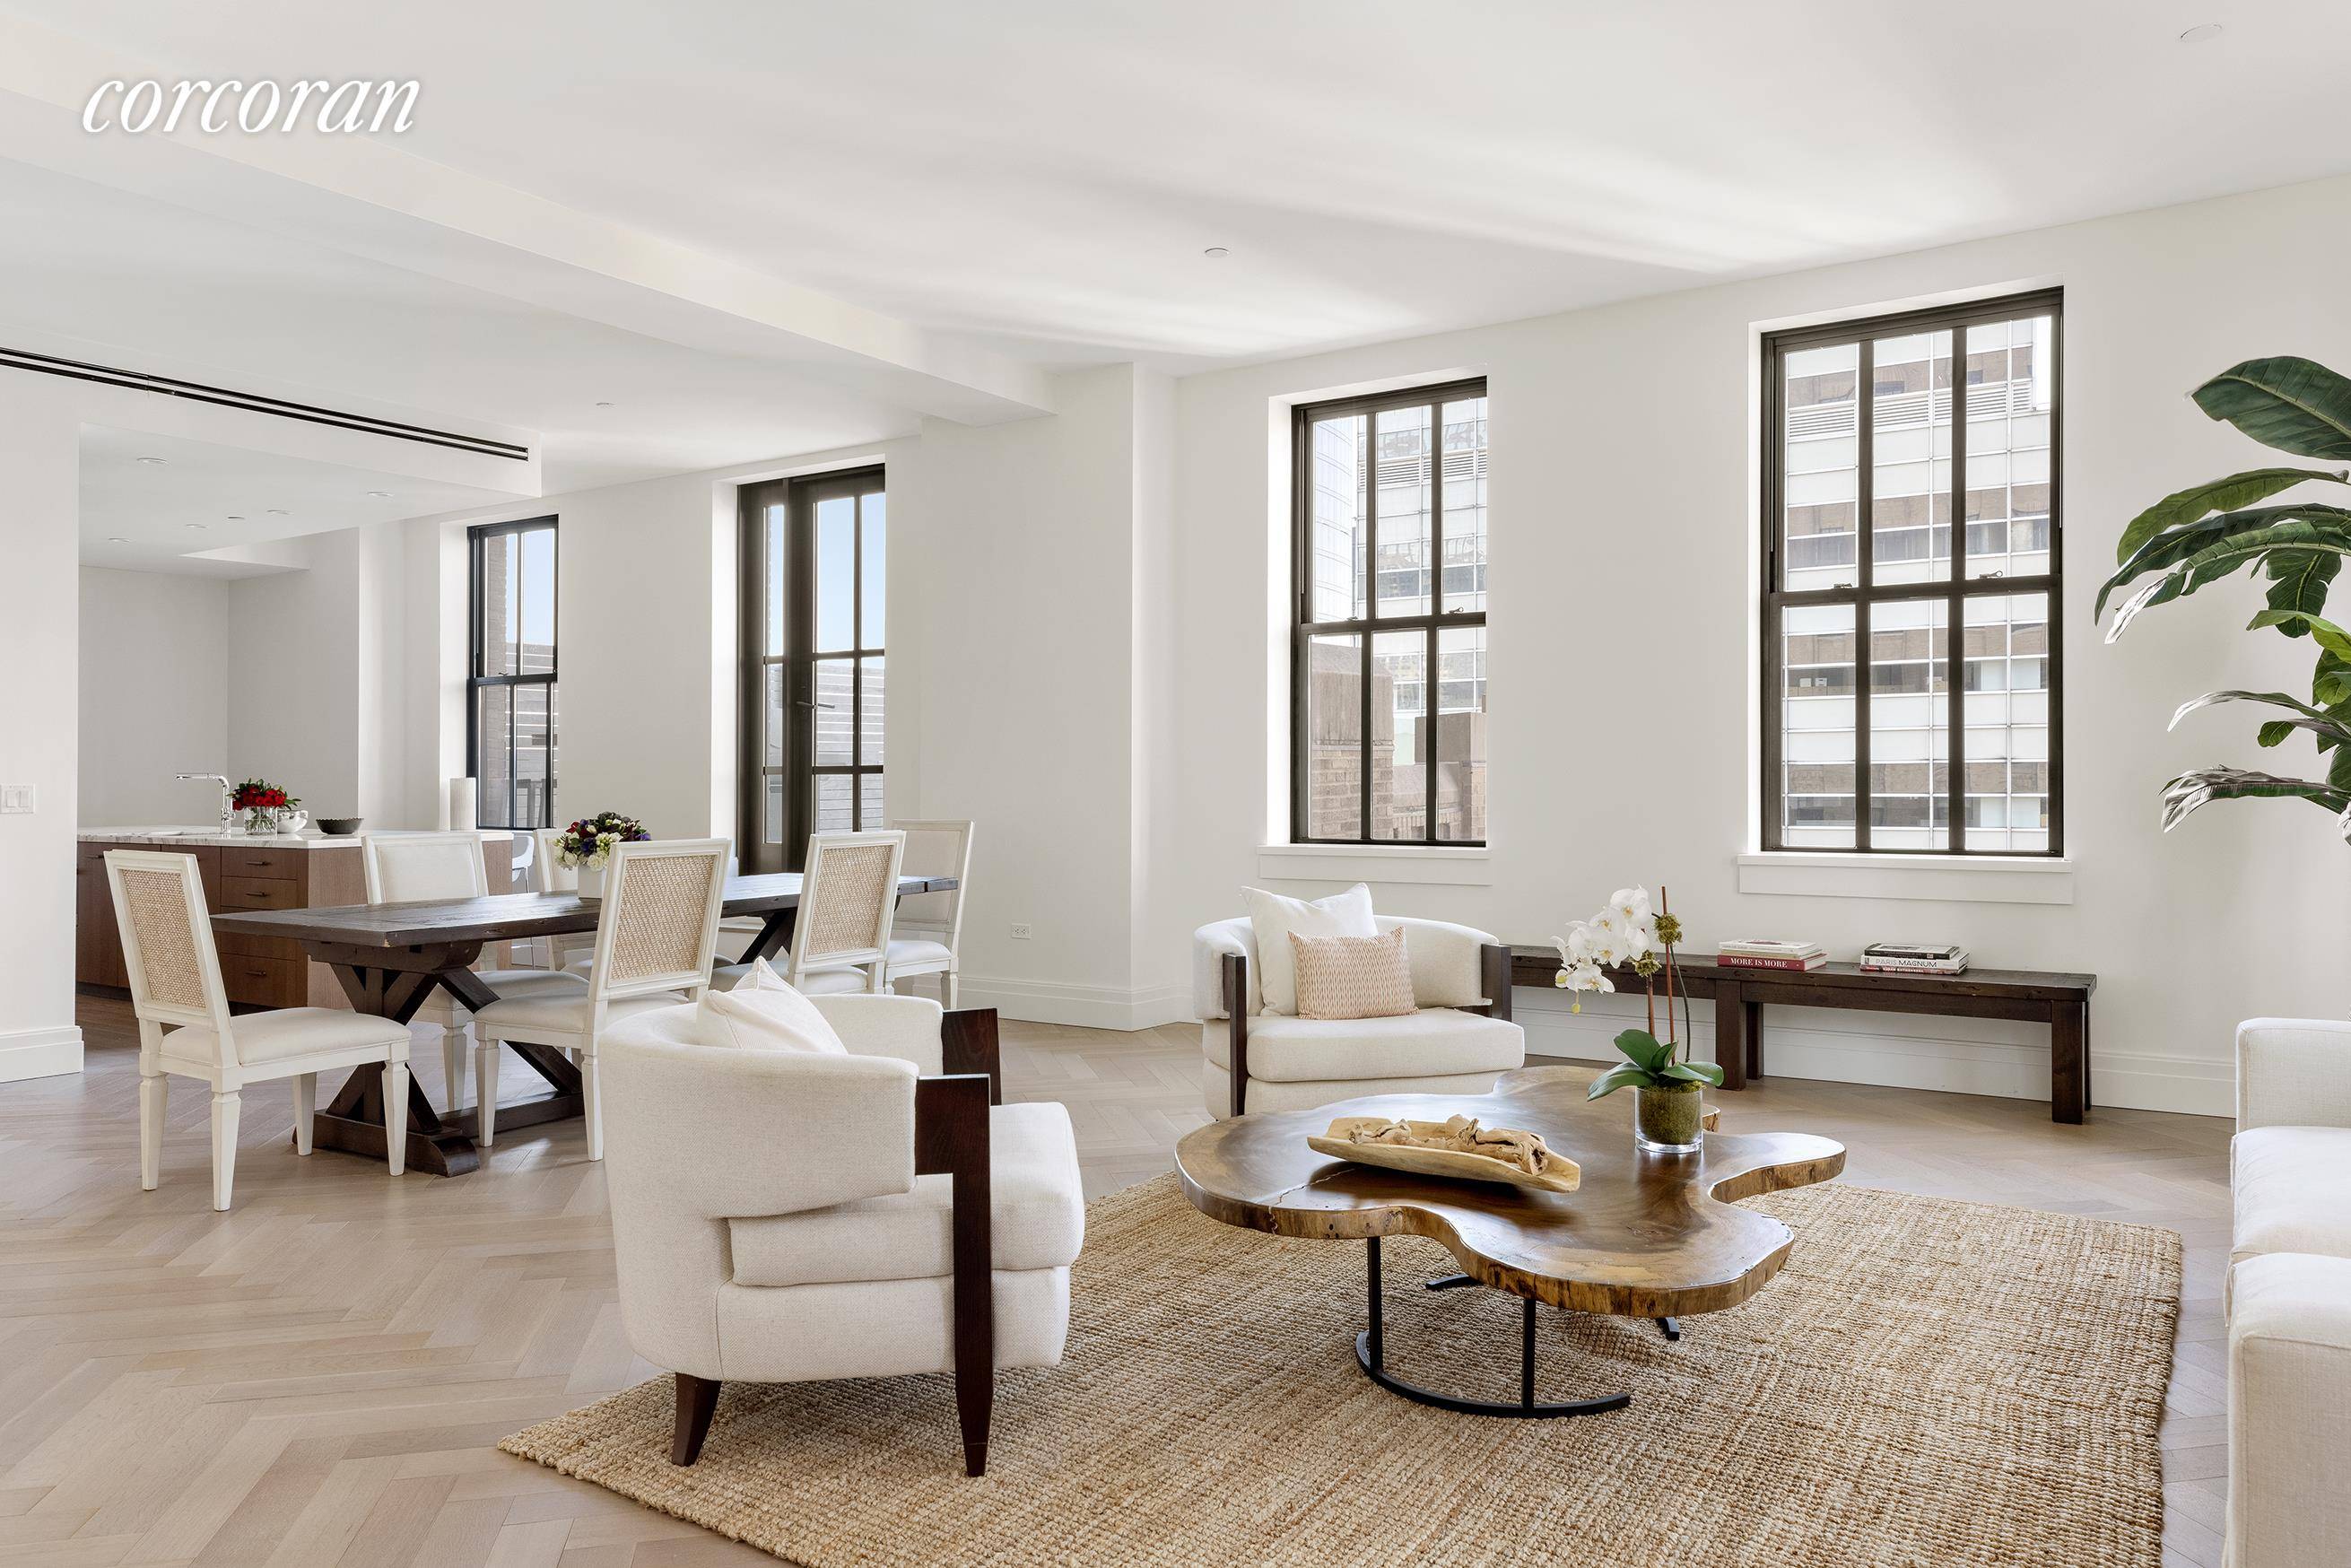 Residence 21C is a gracious 3 bedroom convertible 4 bedroom 4 bath loft spanning 2, 712 SF with an additional 617 SF private terrace perched above Tribeca.